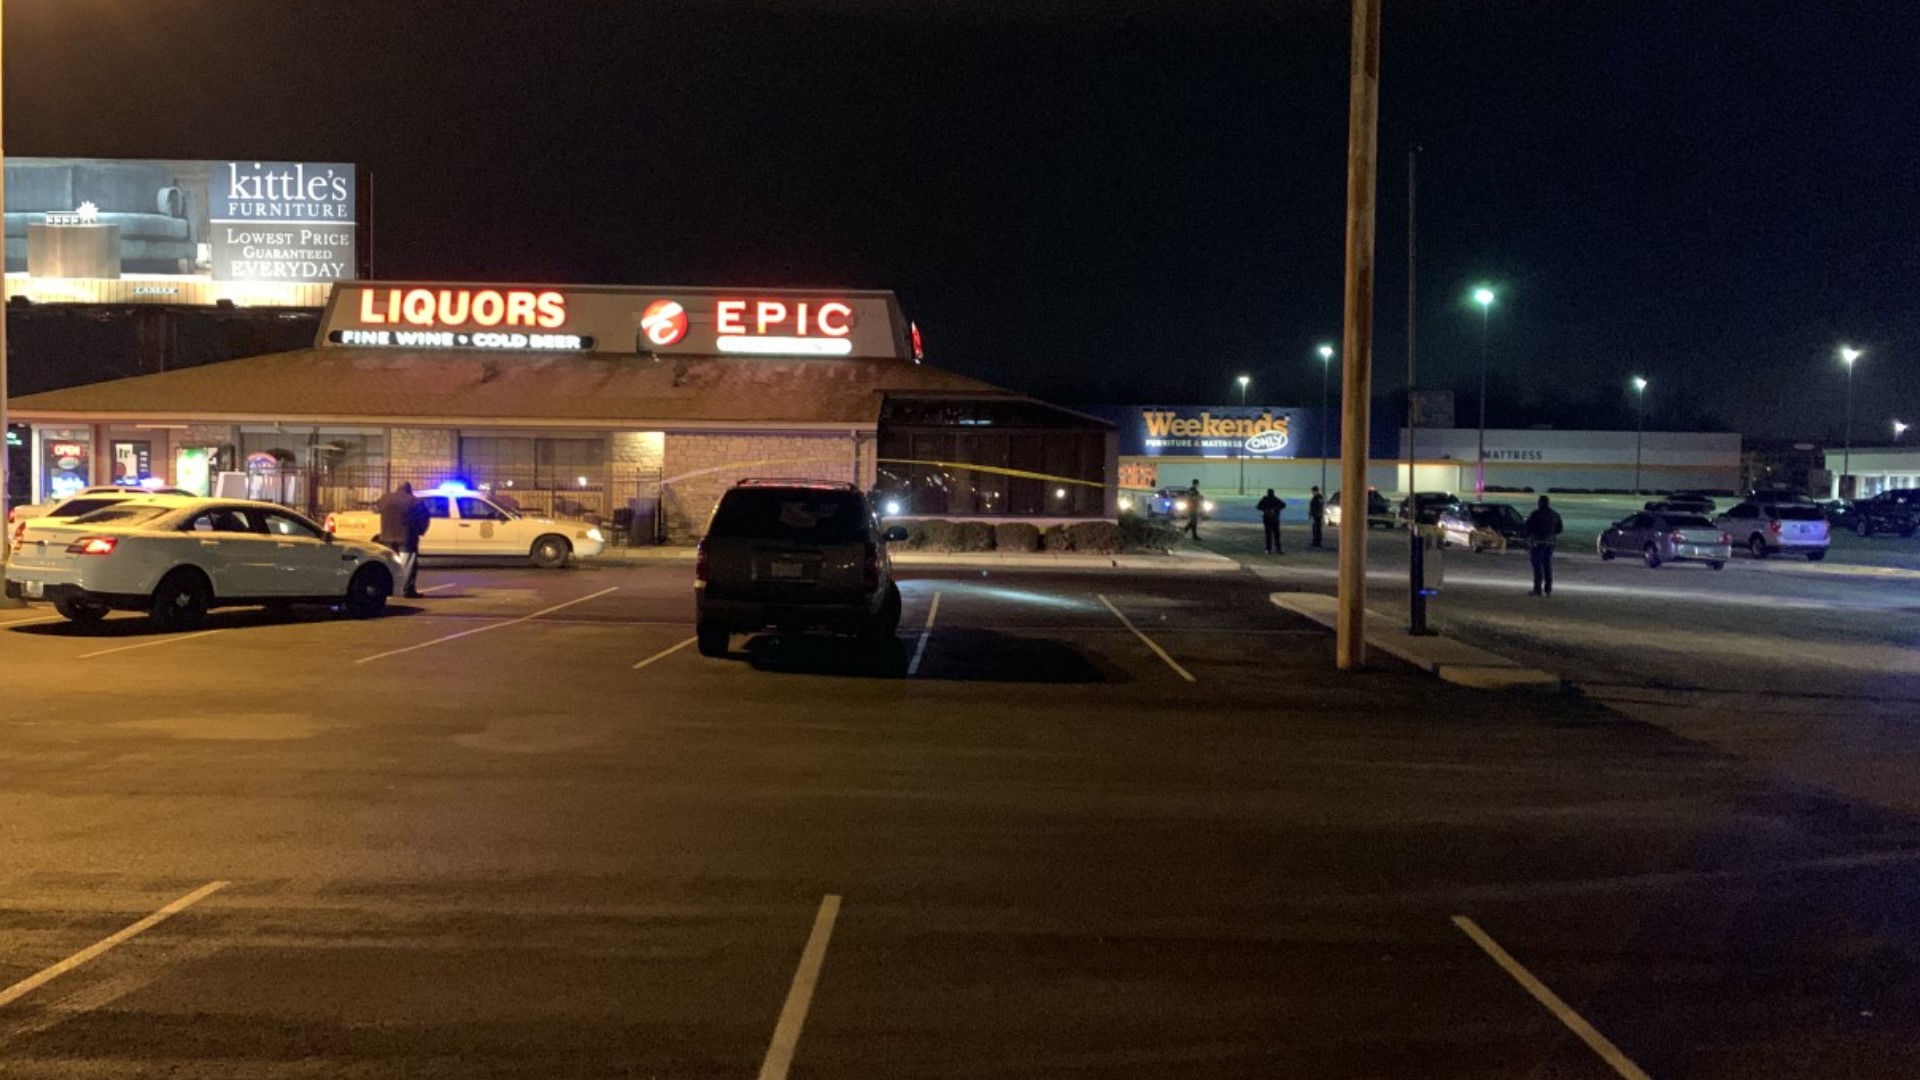 IMPD confirmed four people were shot at the Epic Ultra Lounge, and one was pronounced dead at the scene Thursday night.